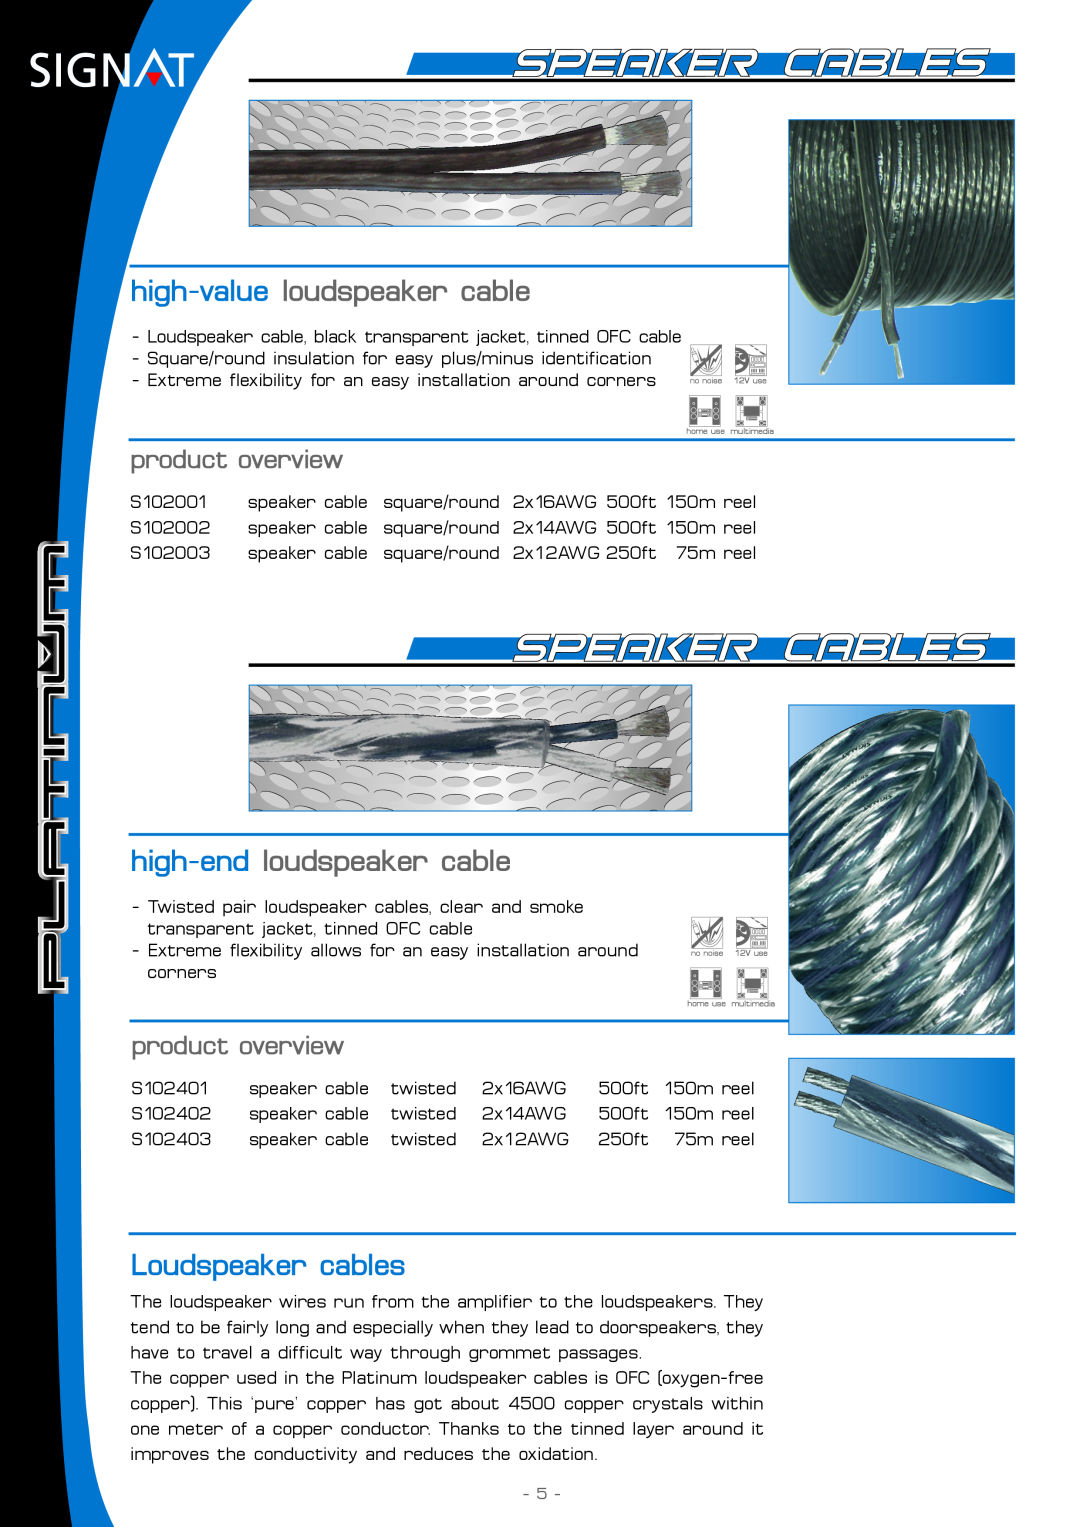 Signat S104105, S104201 high-value loudspeaker cable, high-end loudspeaker cable, Loudspeaker cables, product overview 